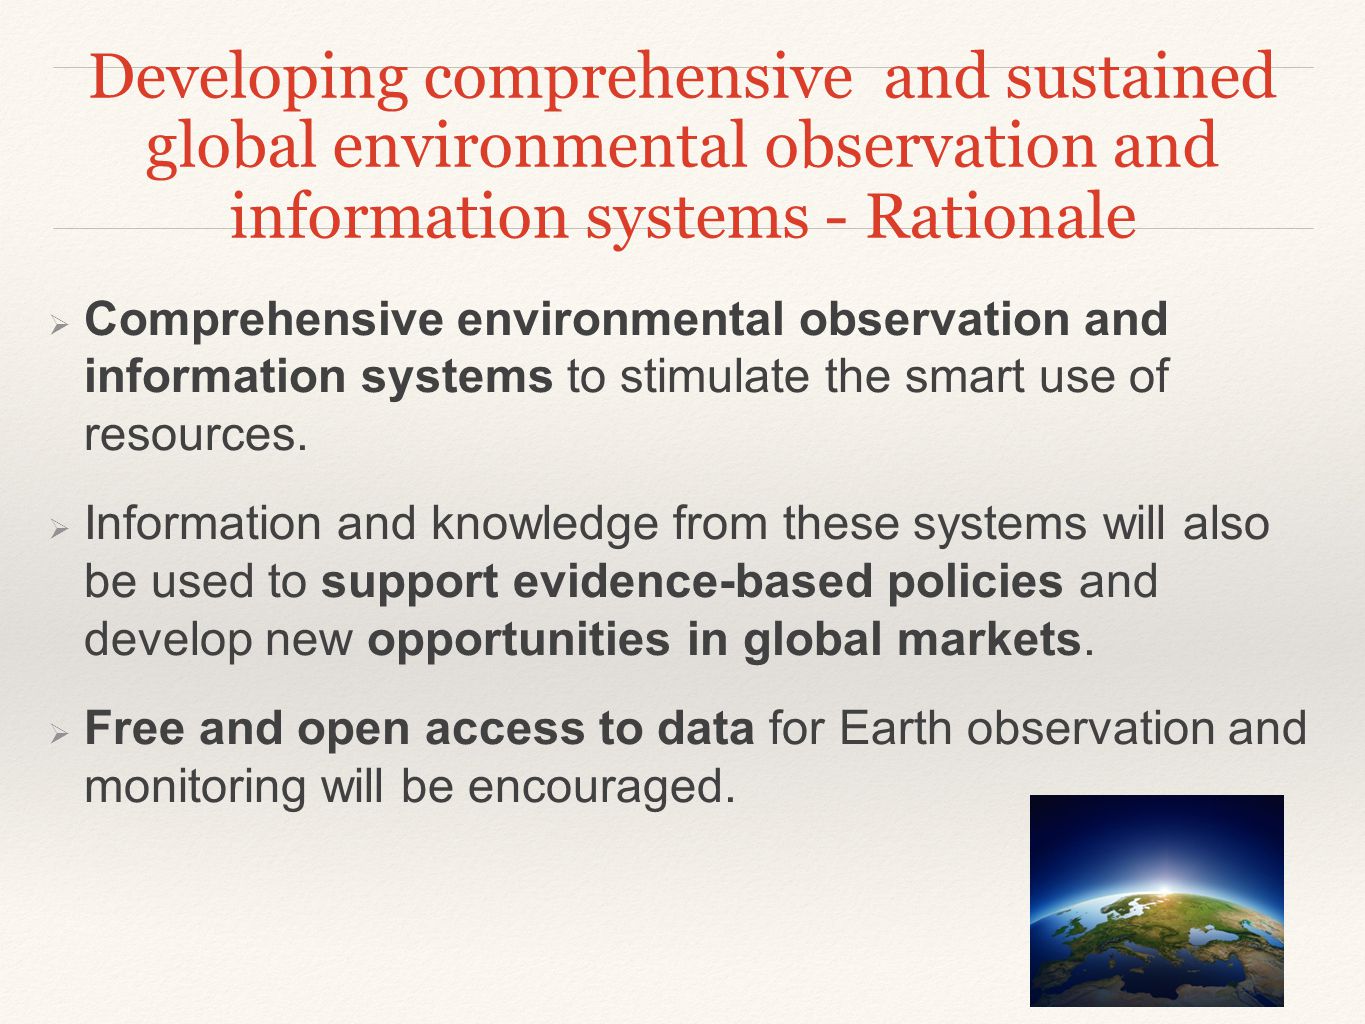 Developing comprehensive and sustained global environmental observation and information systems - Rational e  Comprehensive environmental observation and information systems to stimulate the smart use of resources.